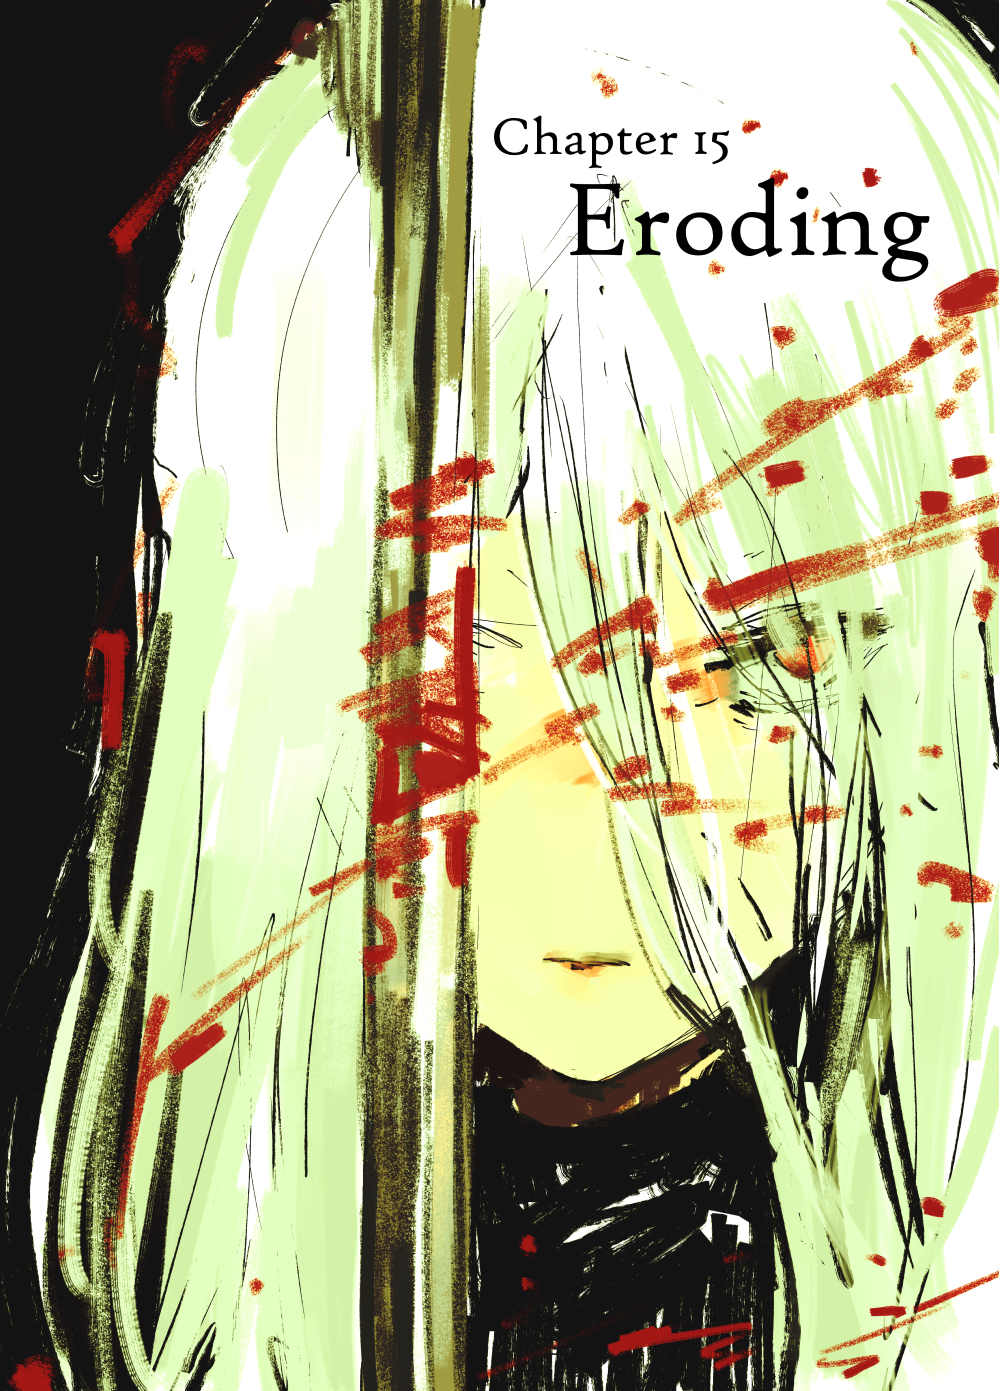 Project SHaDe Ch. 15 Eroding